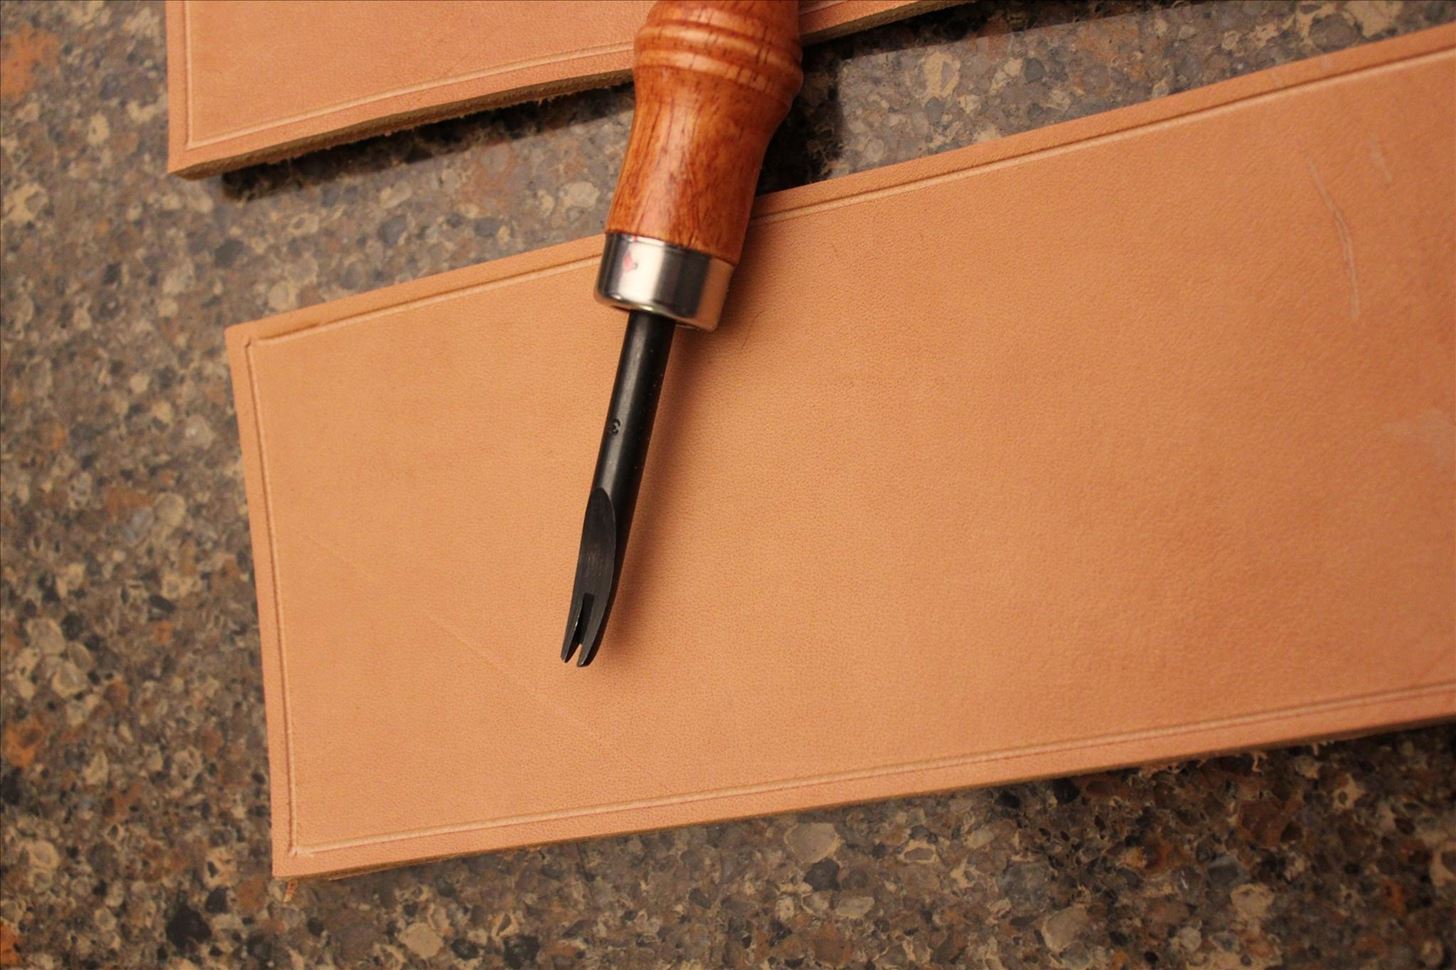 The Quick and Dirty Beginner's Guide to Steampunk Leatherworking, Part One